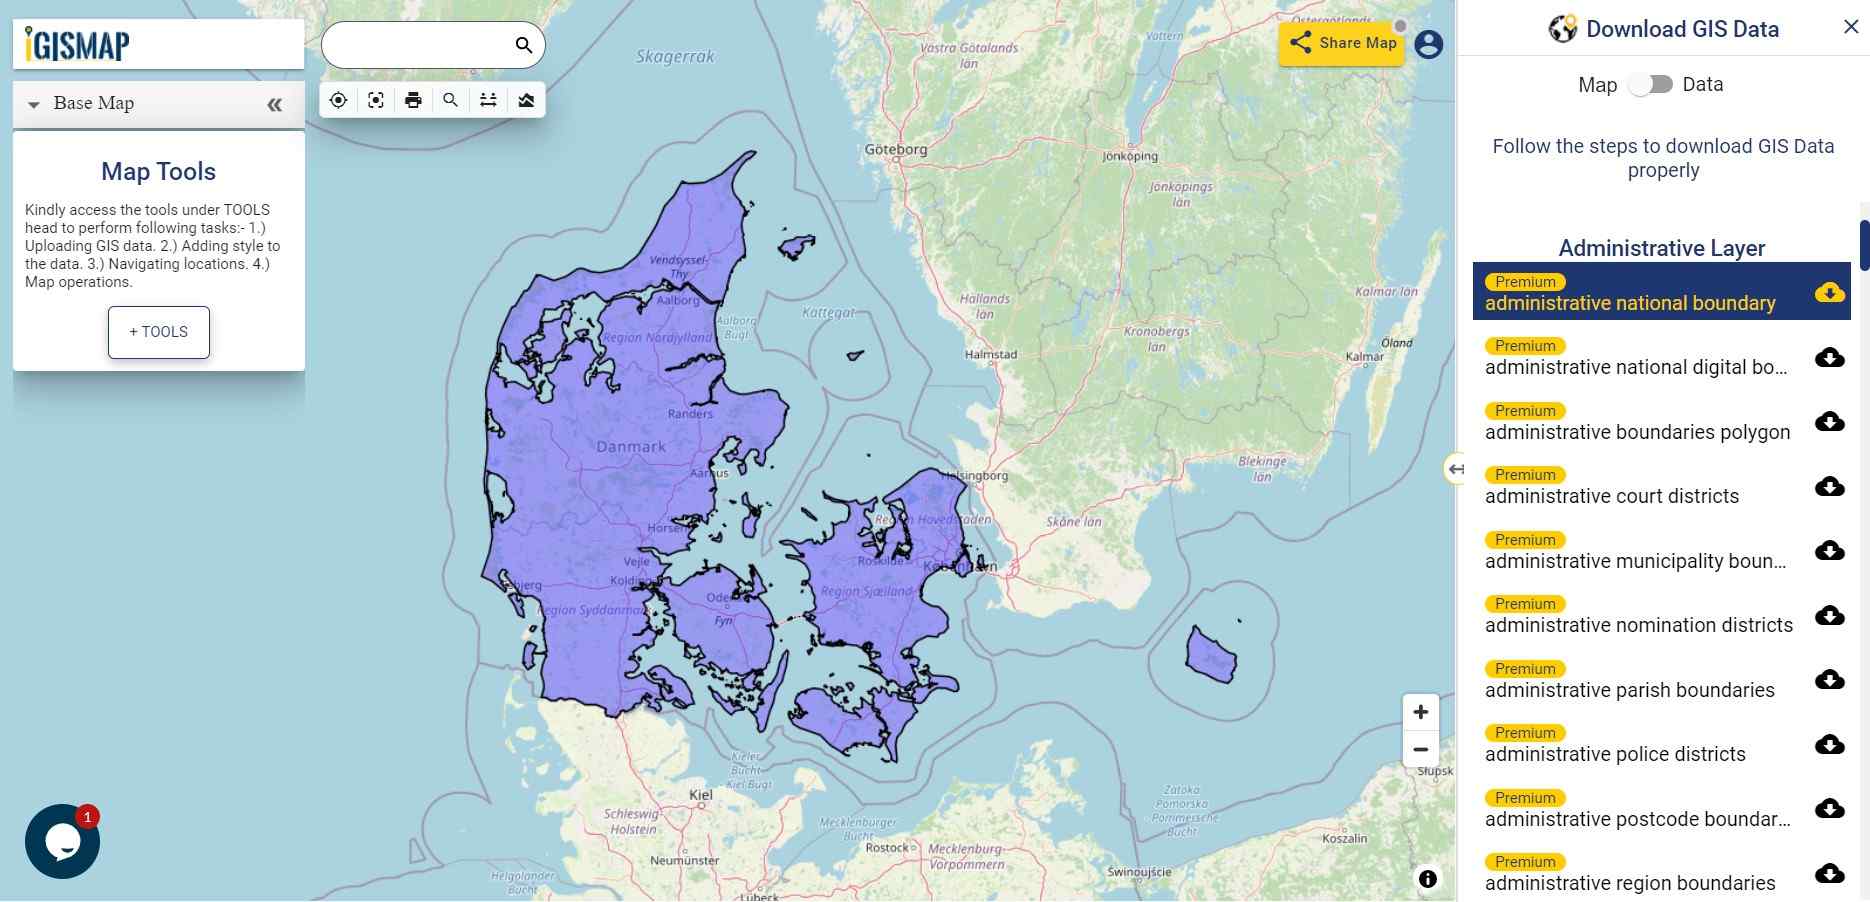 Download Denmark Administrative Boundary Shapefiles Regions Municipalities Postal Areas And More 